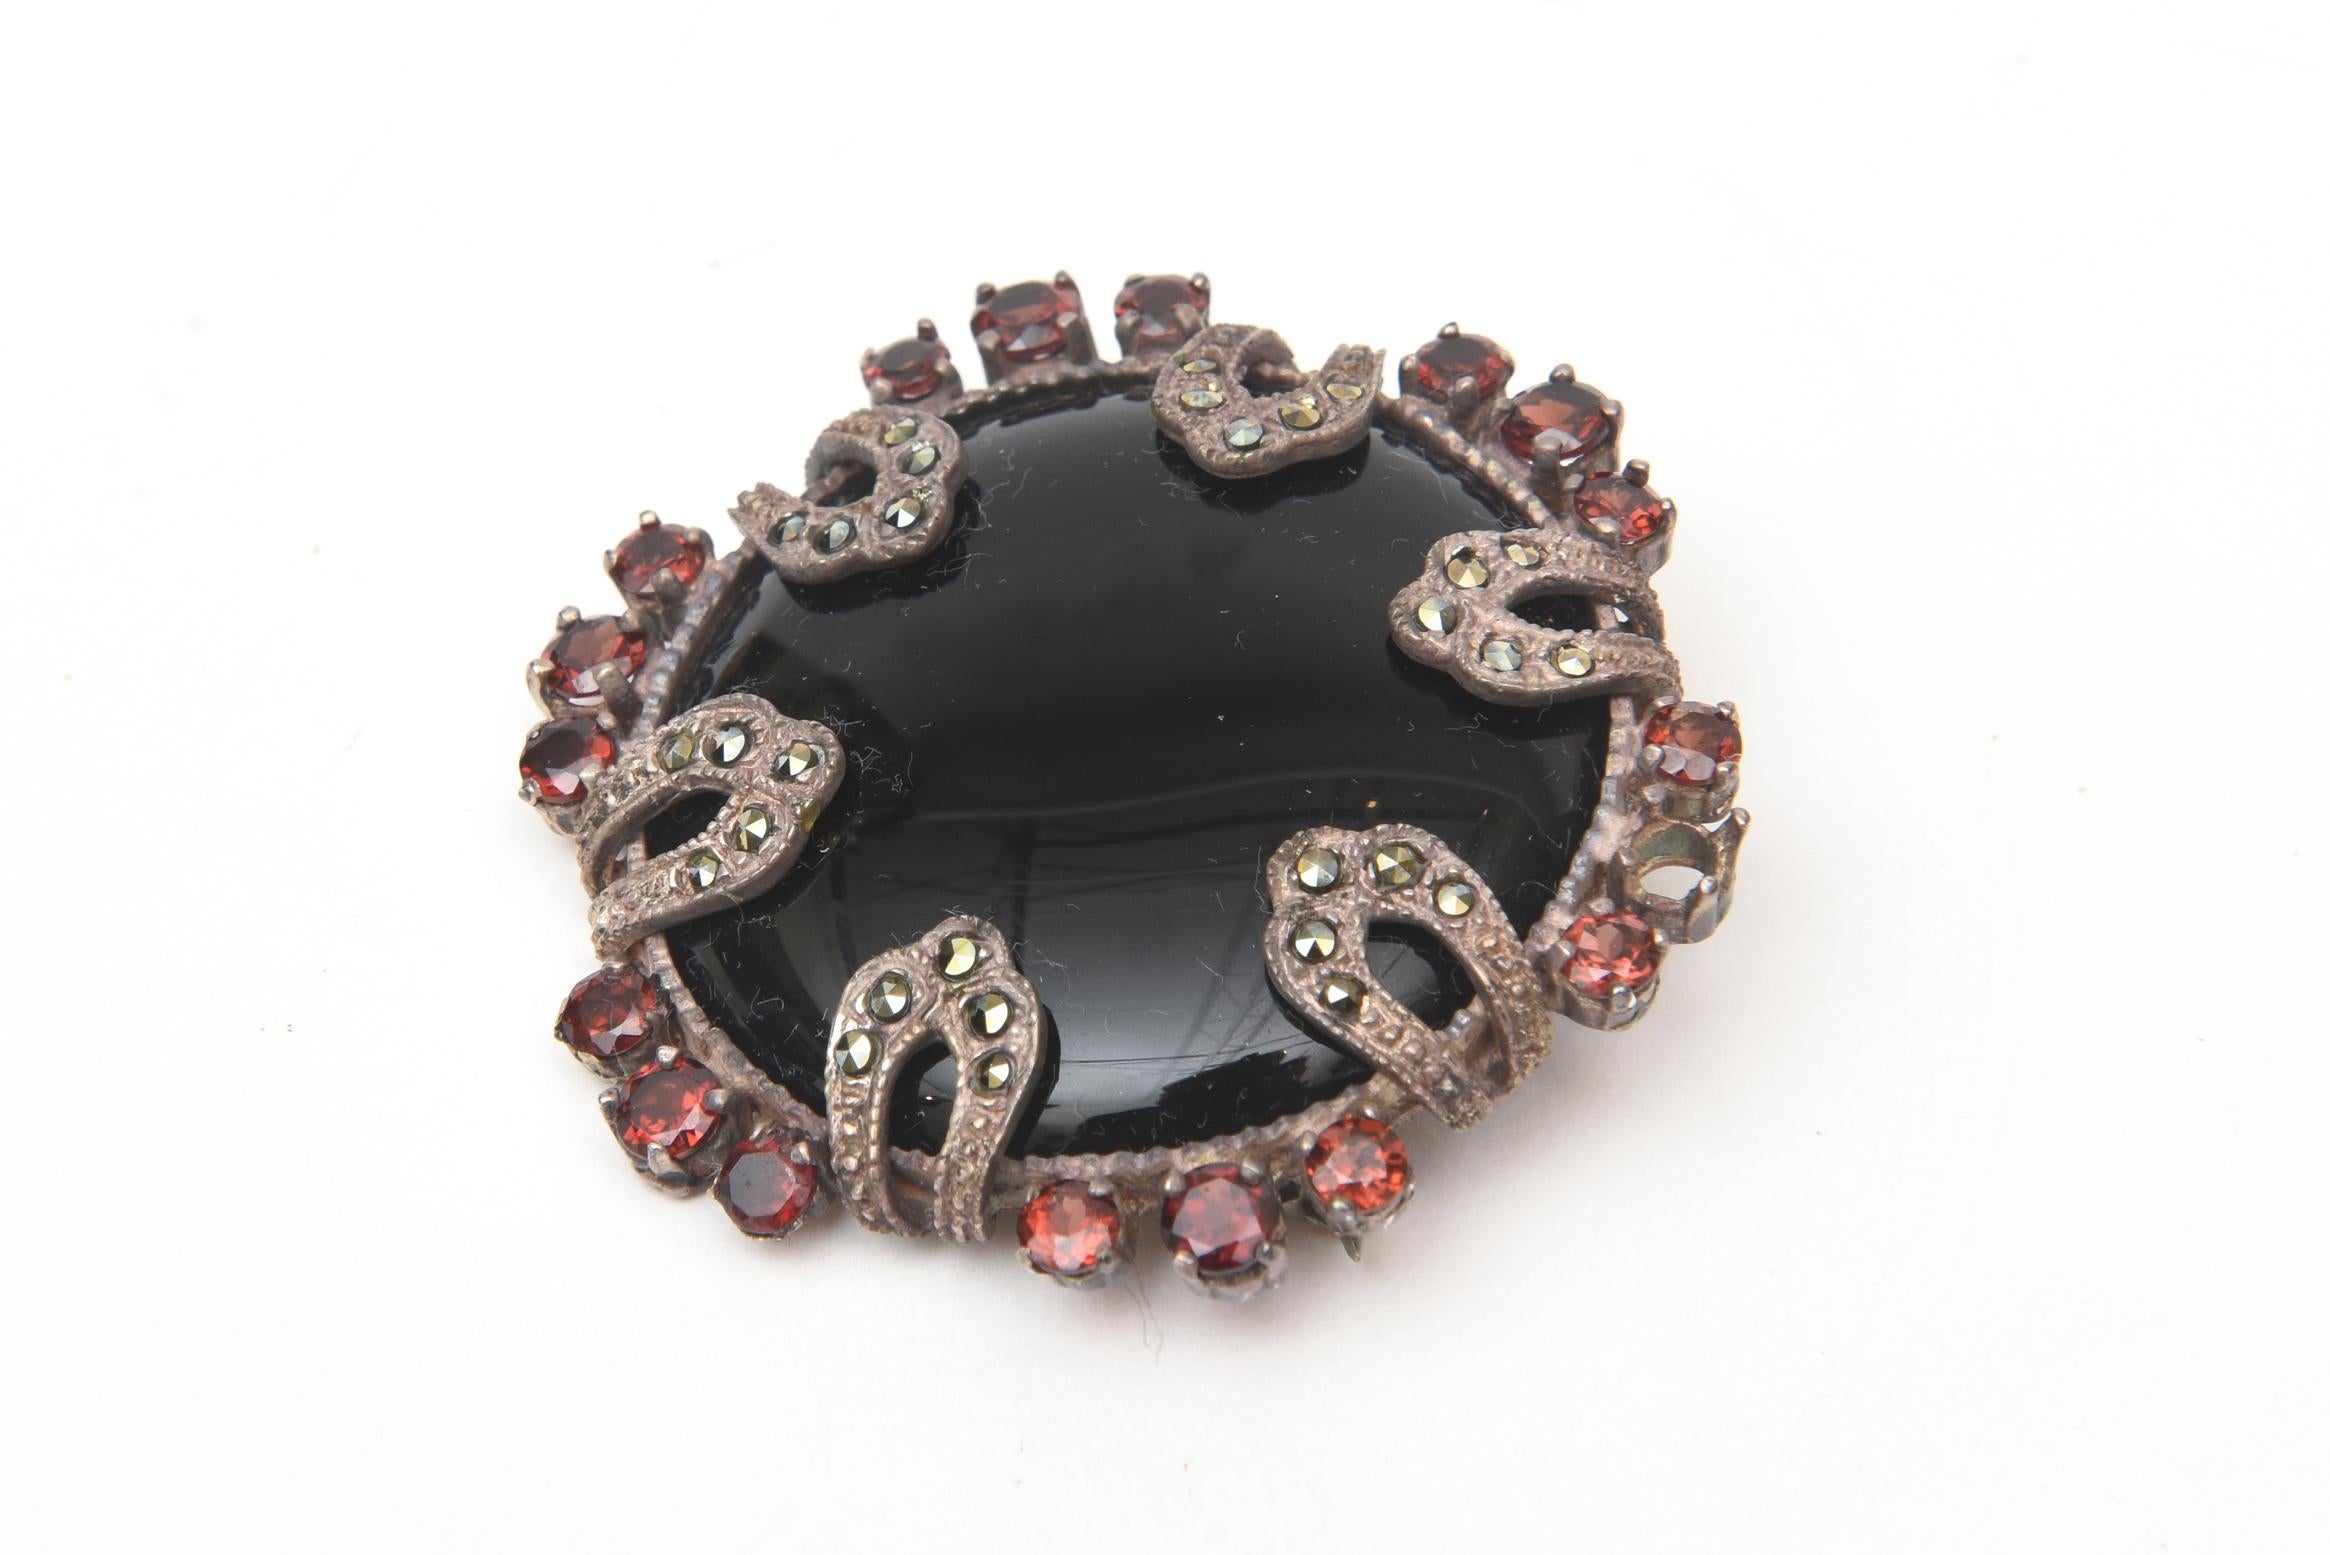 Antique Cushion Cut Onyx, Marquisette, Garnet and Sterling Silver Art Deco Pin Brooch